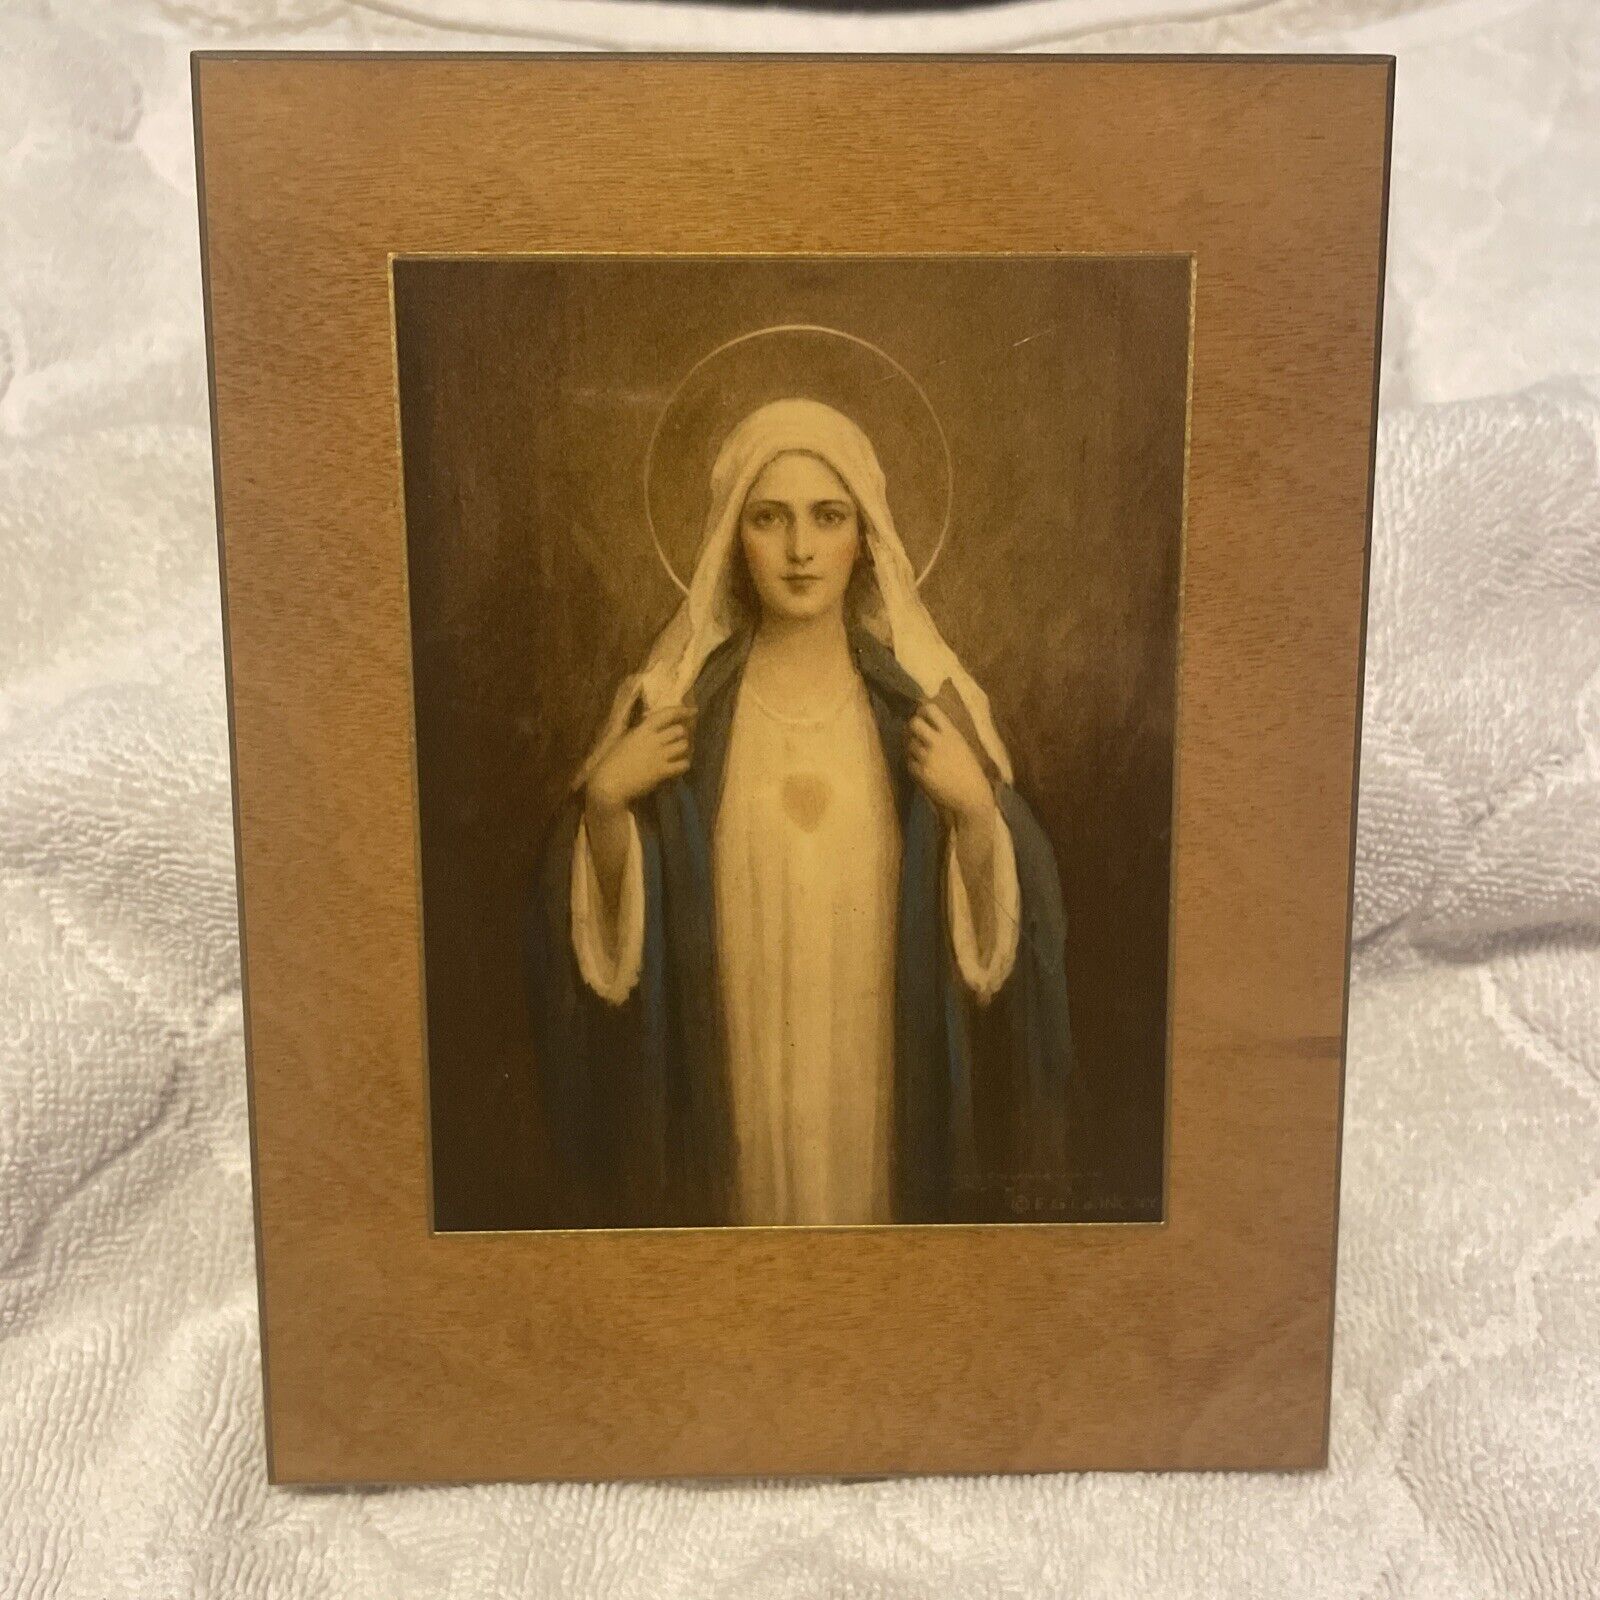 Vintage “Immaculate Heart Of Mary” E.G. Co Inc. 5.5x 7 Inch Perma-plack